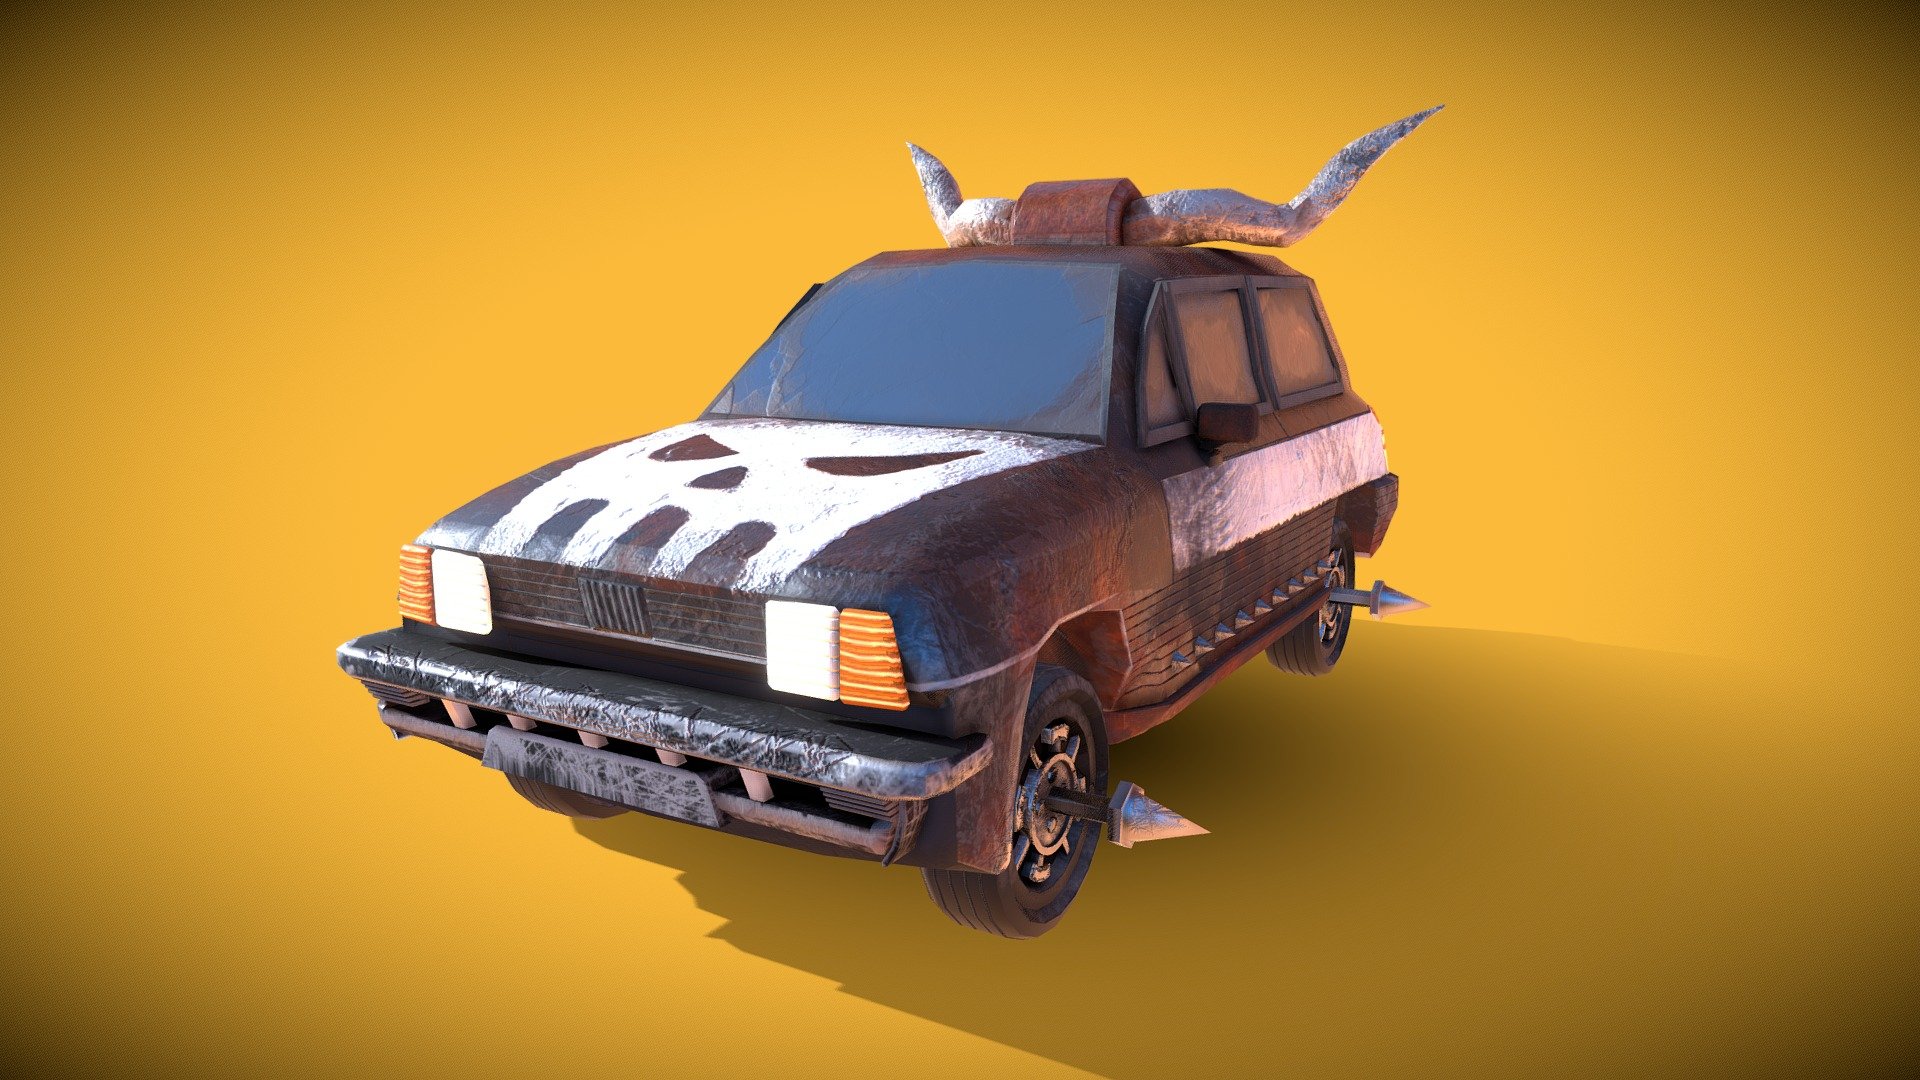 Lowpoly model for videogames.
A vehicle made to survive in a post apocalyptic world, with style 3d model